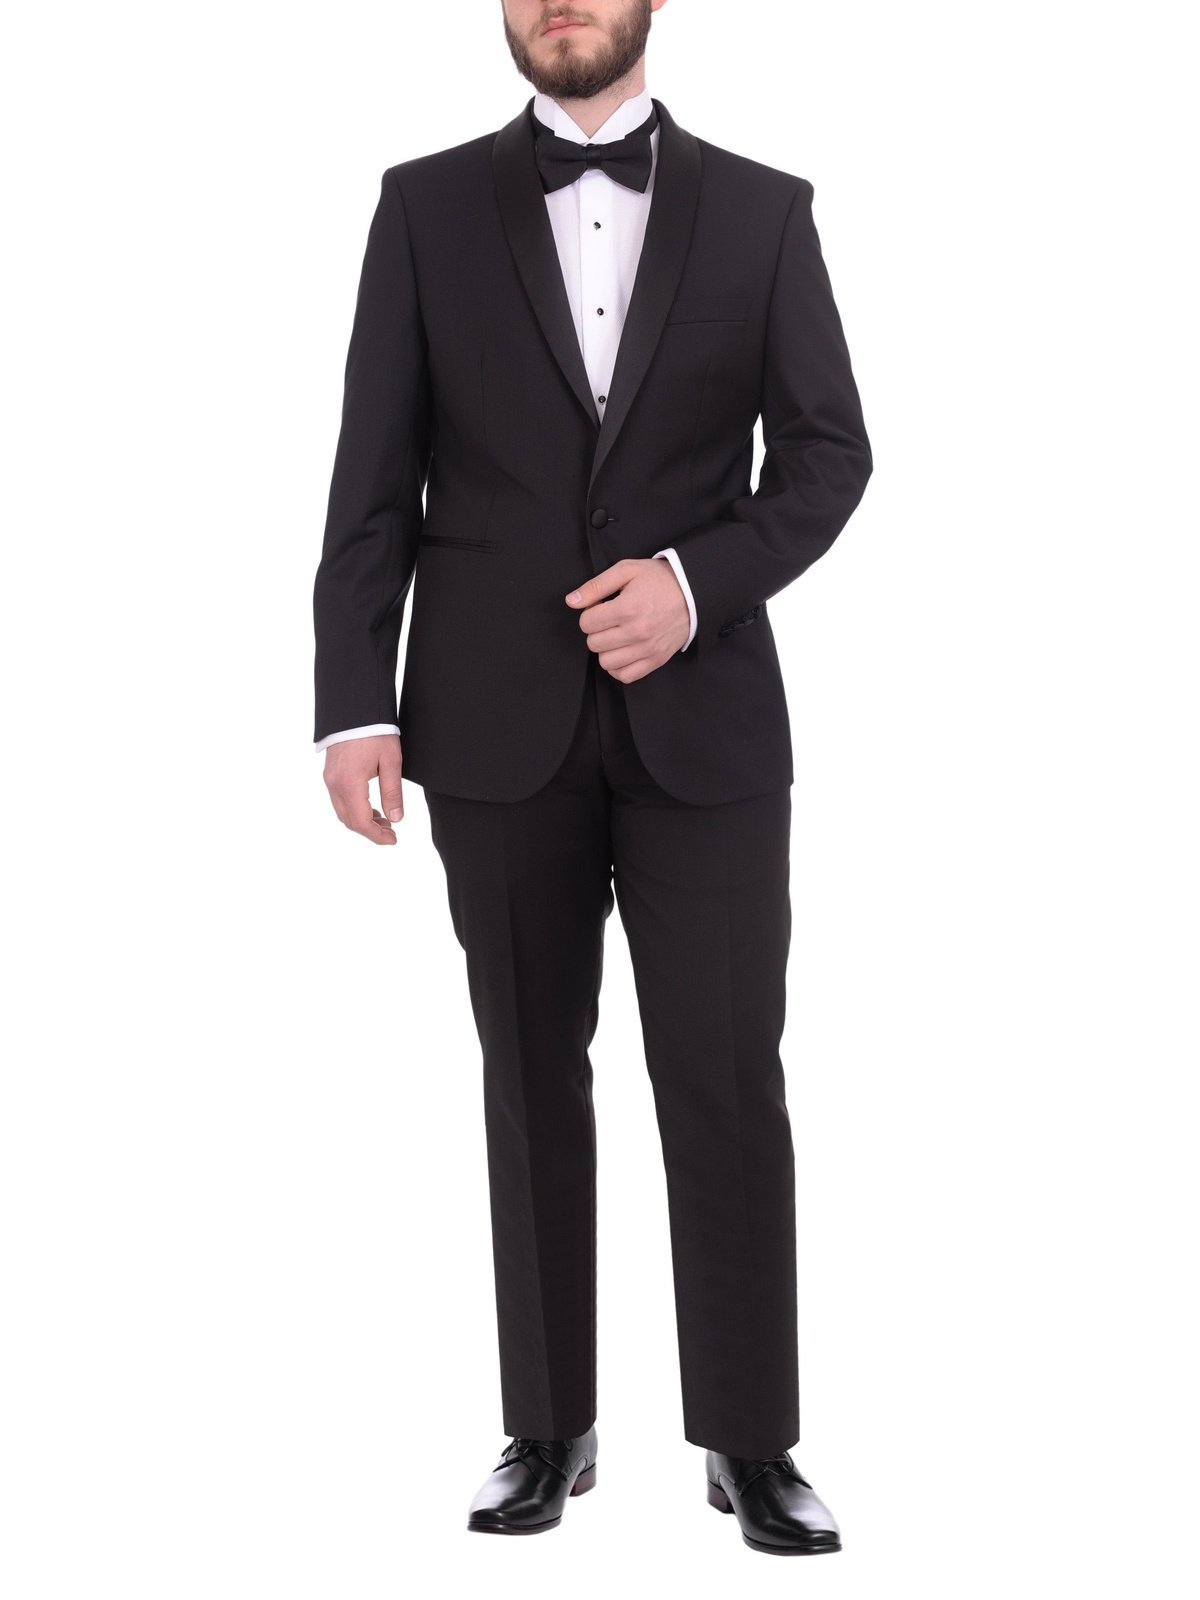 Gino Vitale TUXEDOS Gino Vitale Slim Fit Solid Black One Button Tuxedo Suit With Satin Shawl Lapels